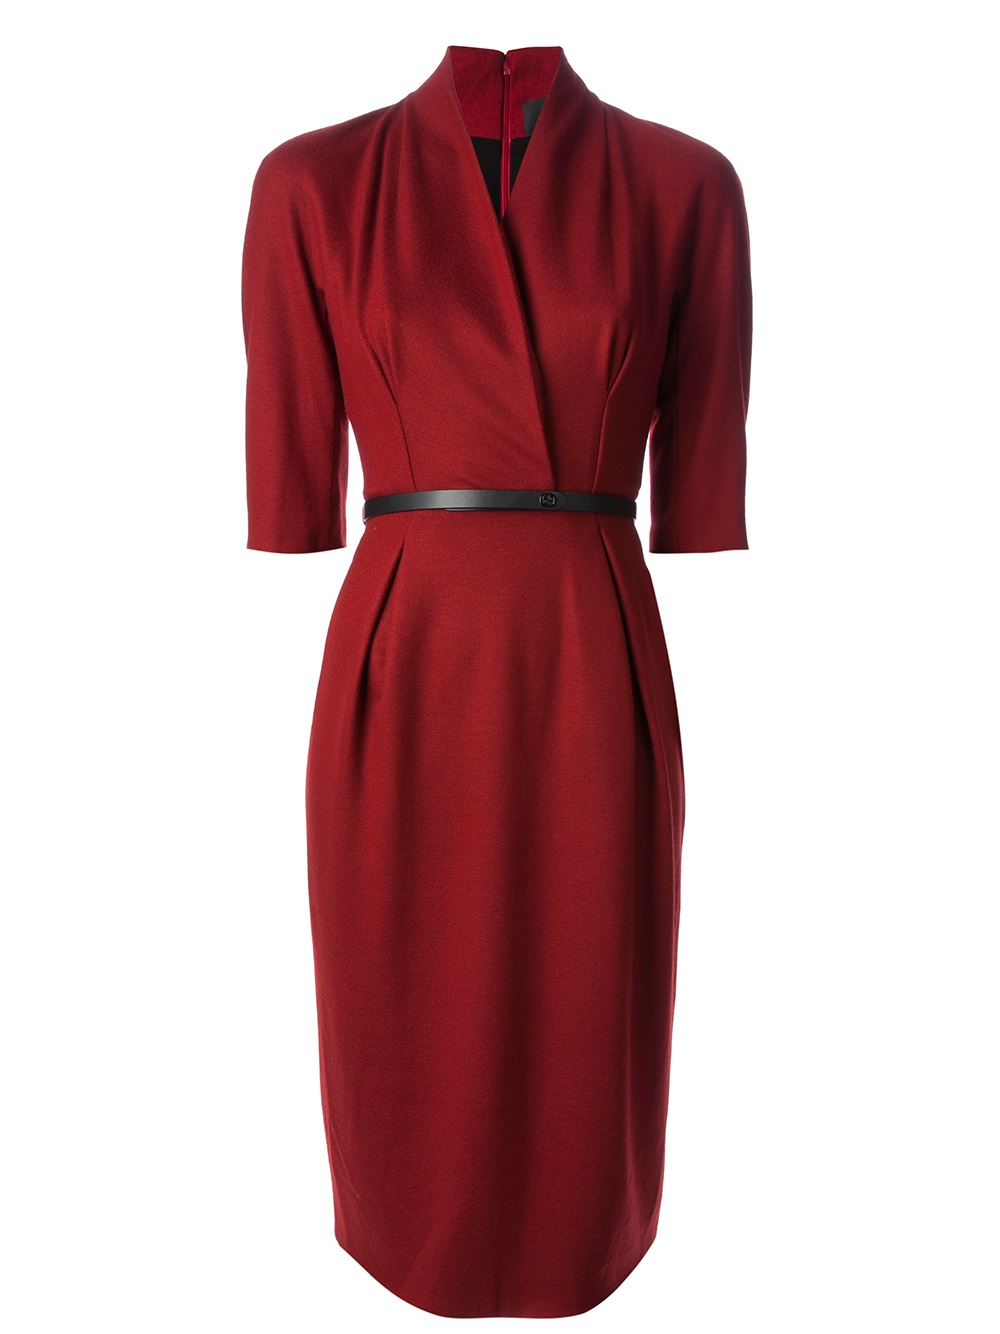 Gucci Belted Knee Length Dress in Red - Lyst